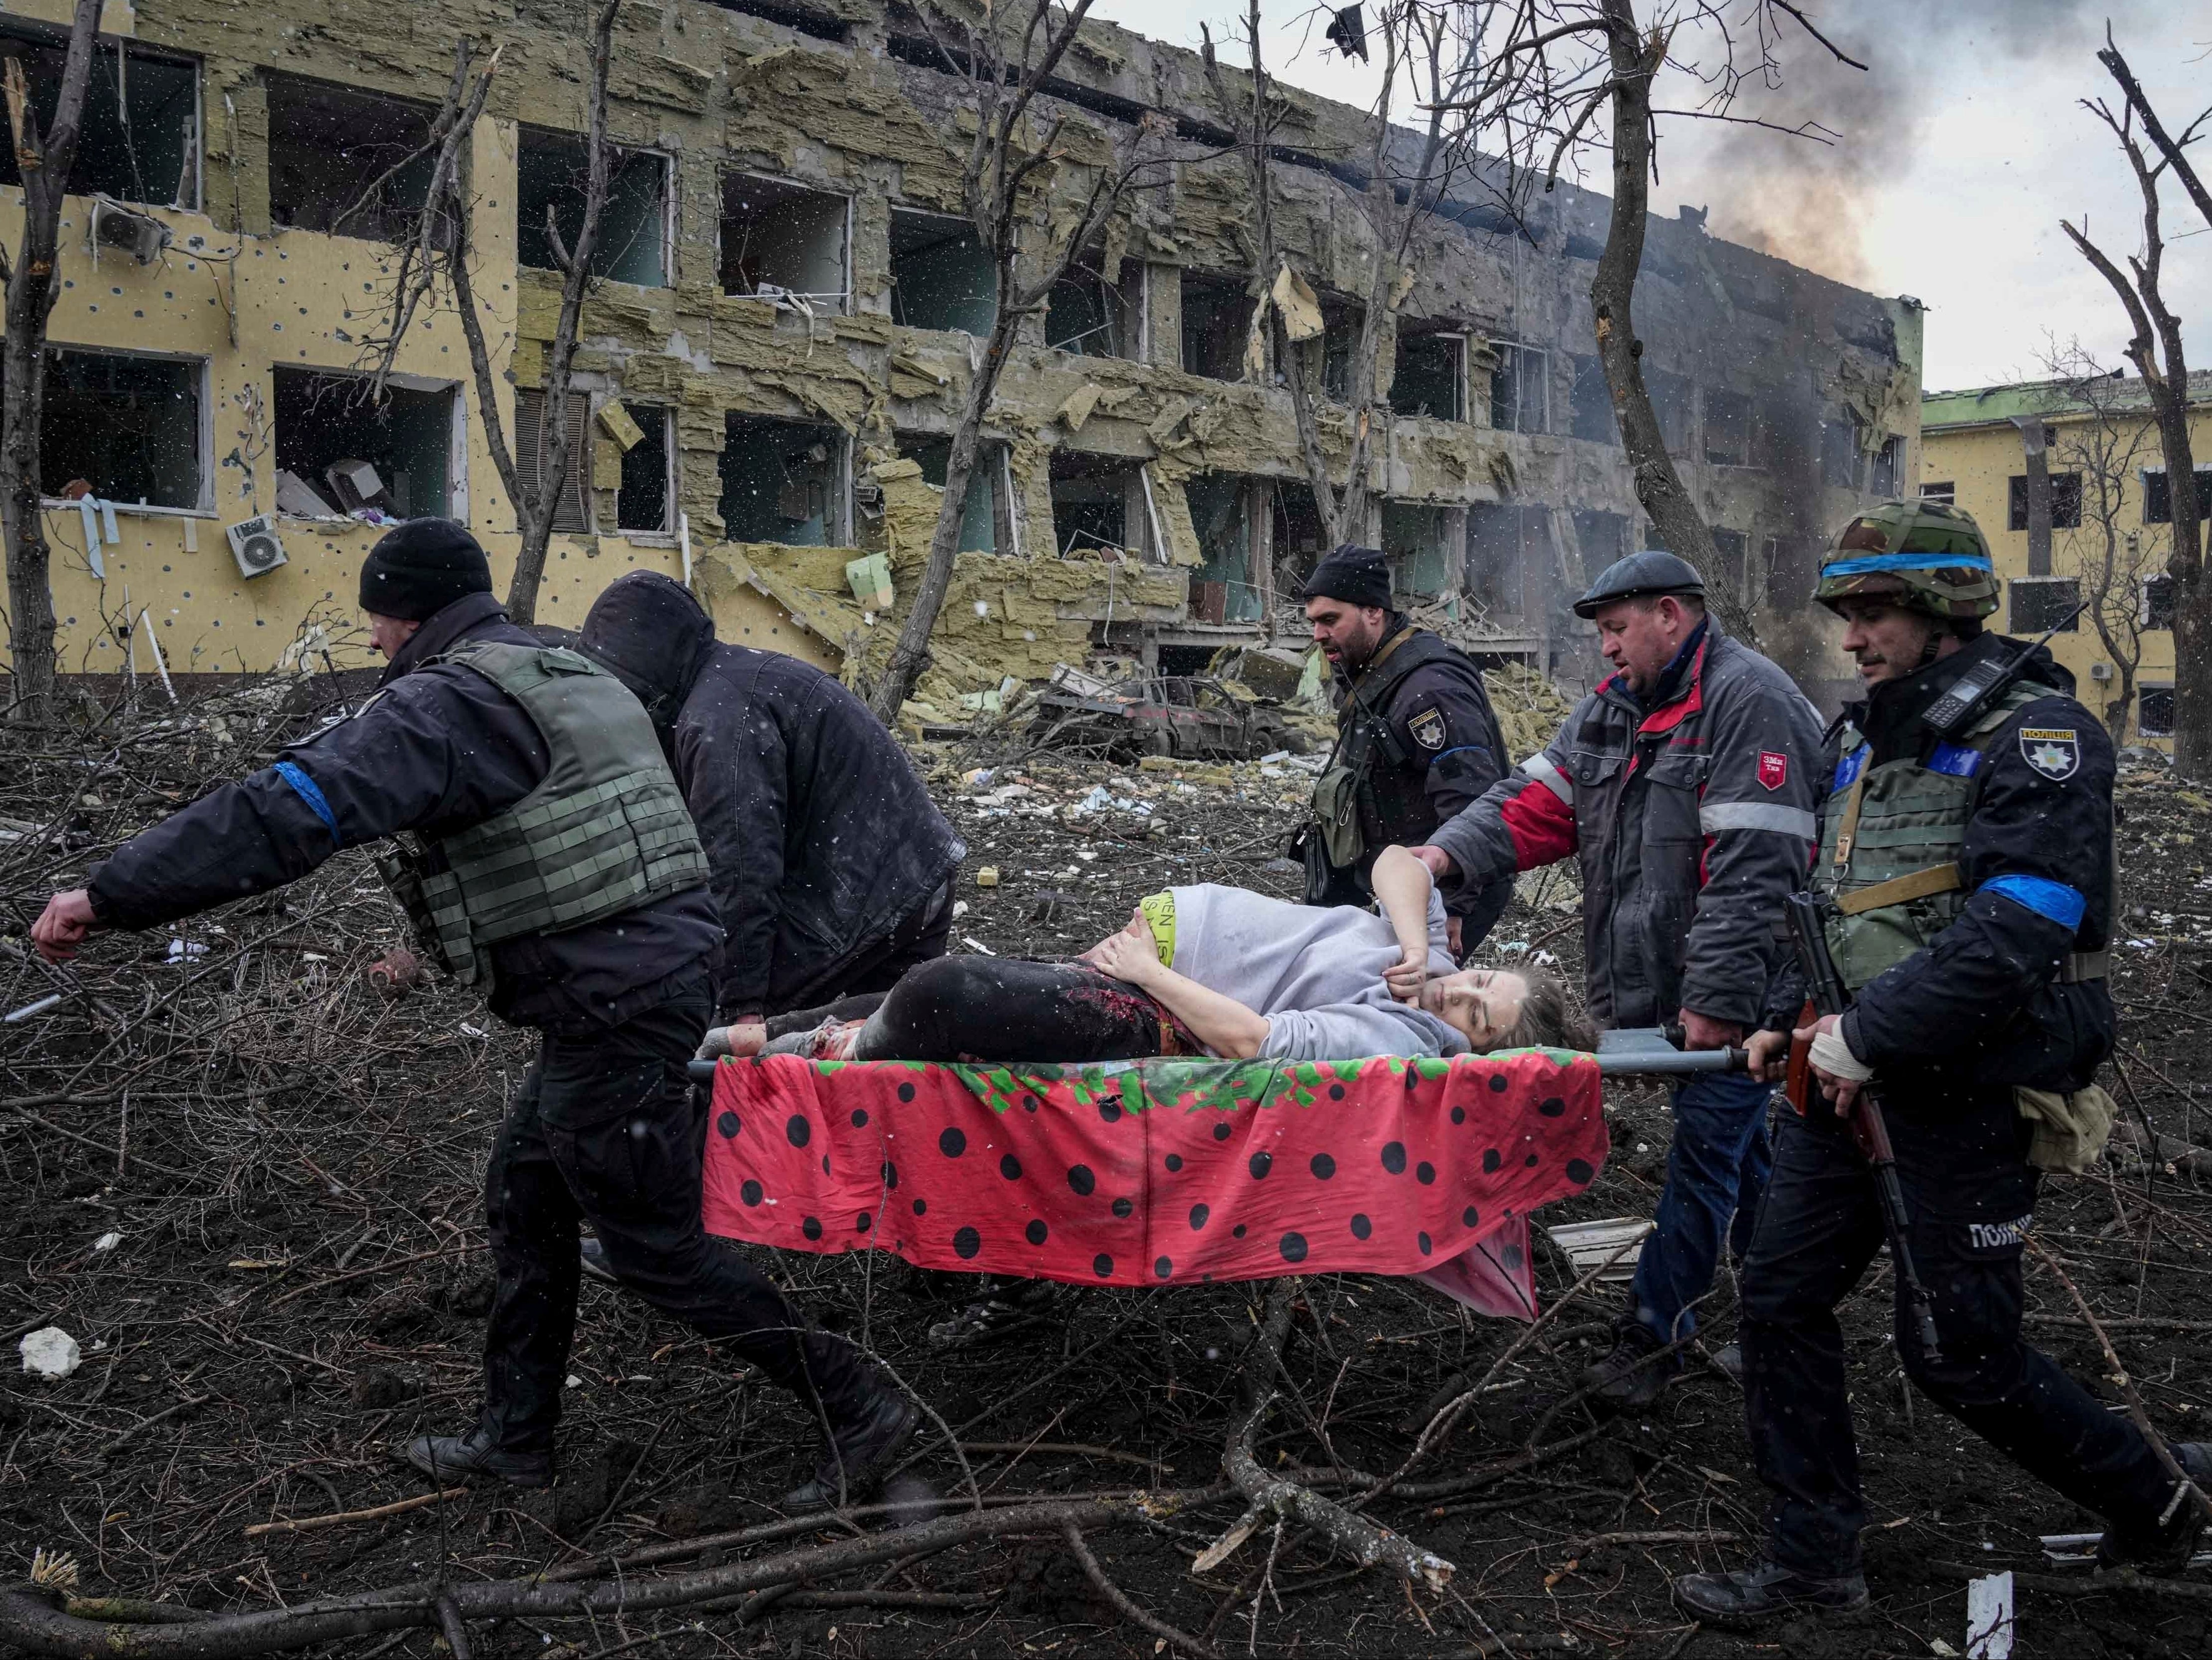 The pregnant woman was carried away on a stretcher after being injured in the Mariupol bombing